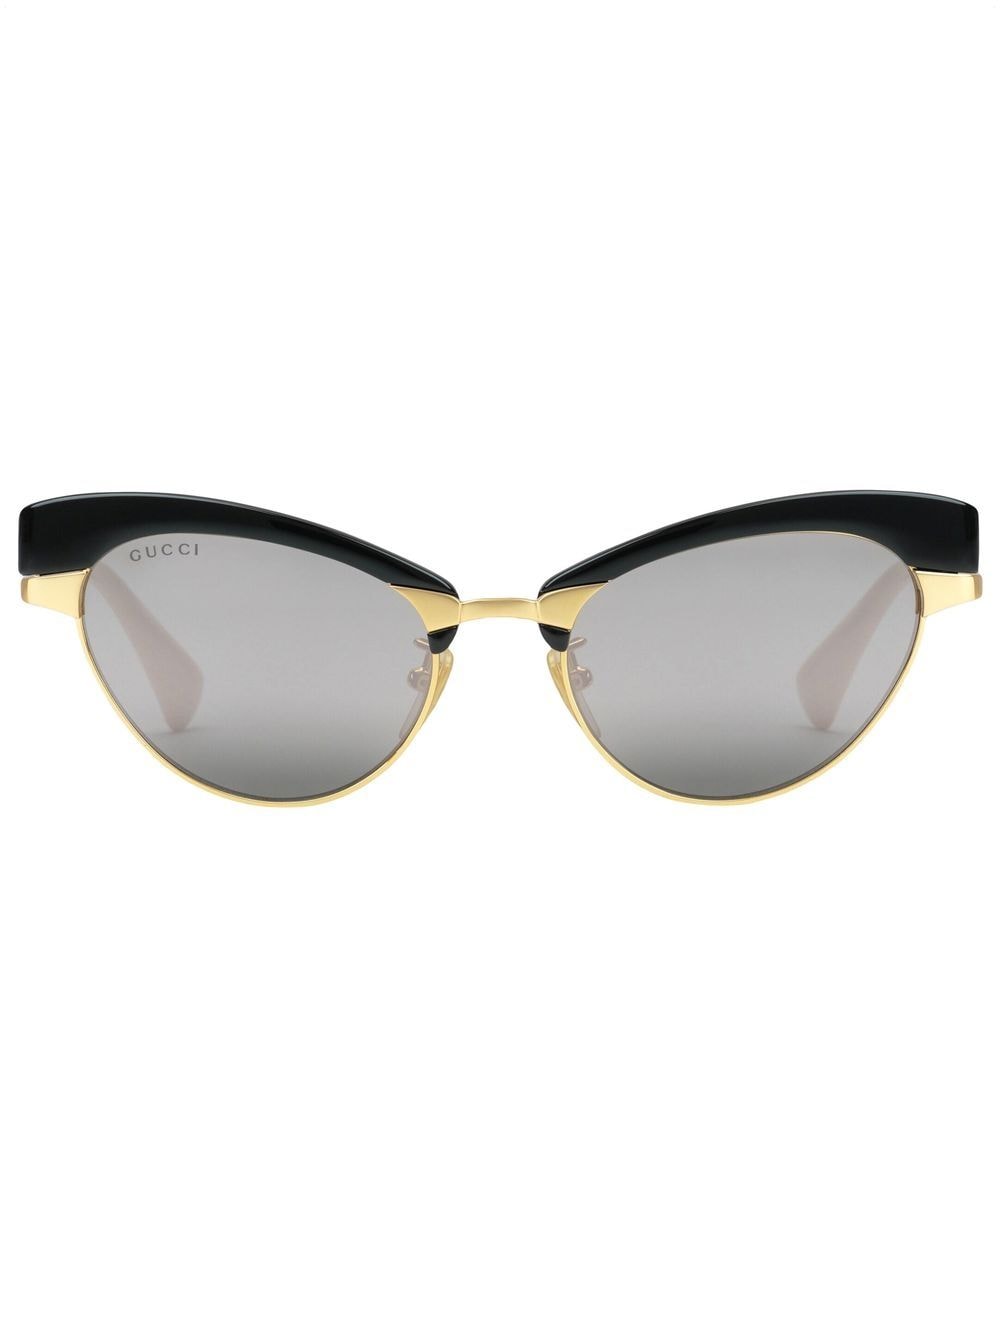 GUCCI Gold and Silver Metal Sunglasses for Women - FW22 Collection